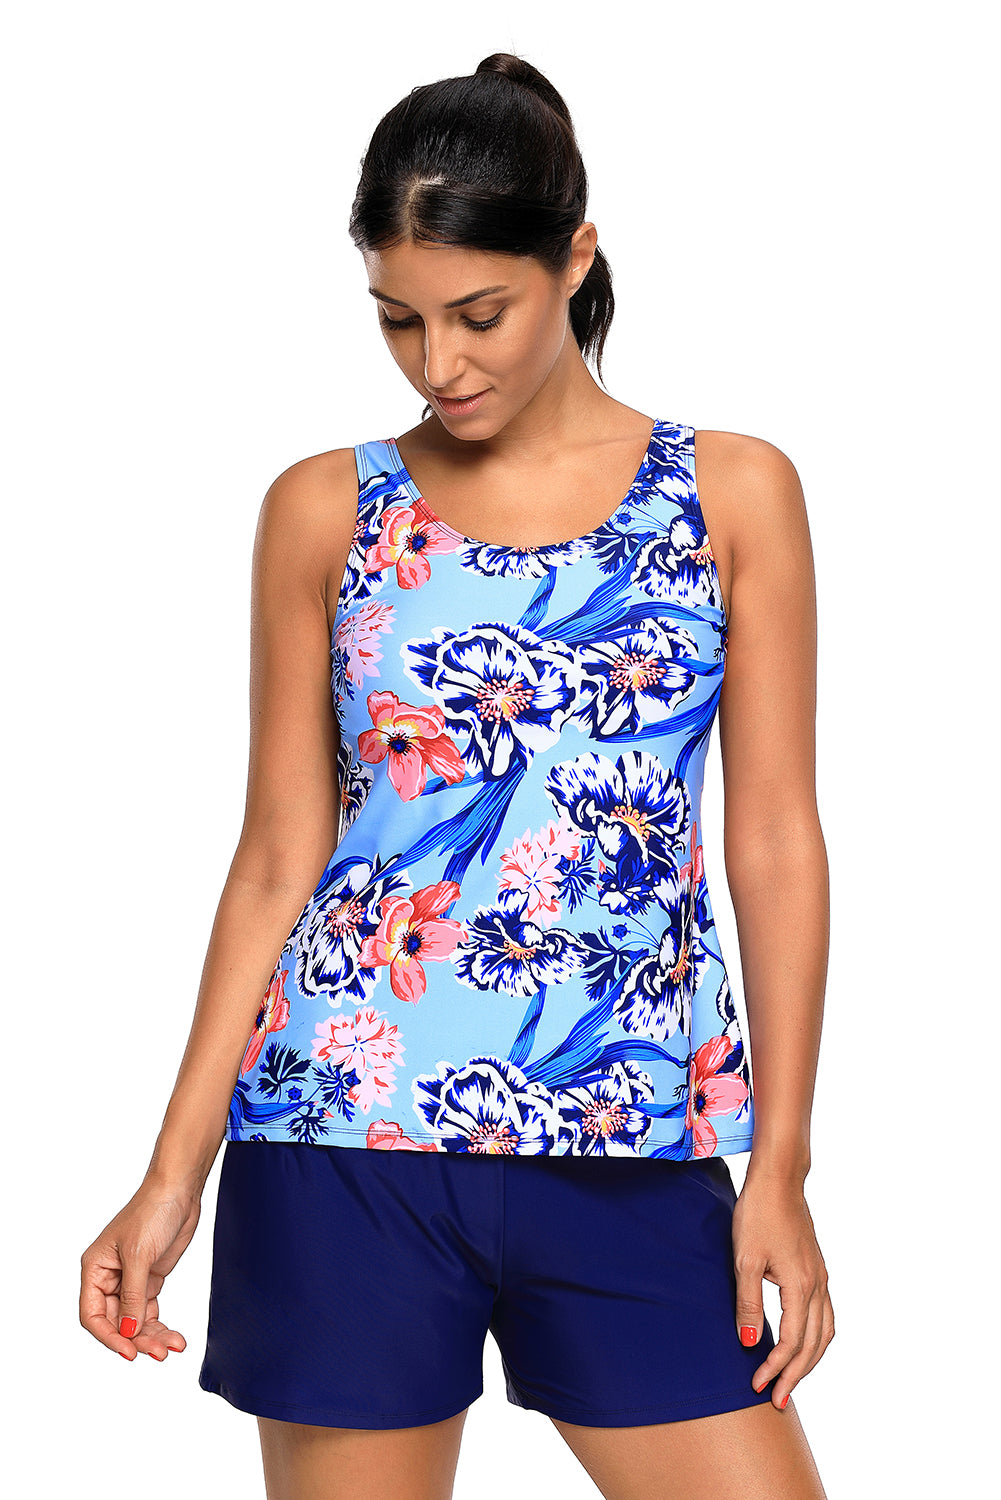 Fashionable 2 Piece Swimsuit Printed Sleeveless Top And Shorts